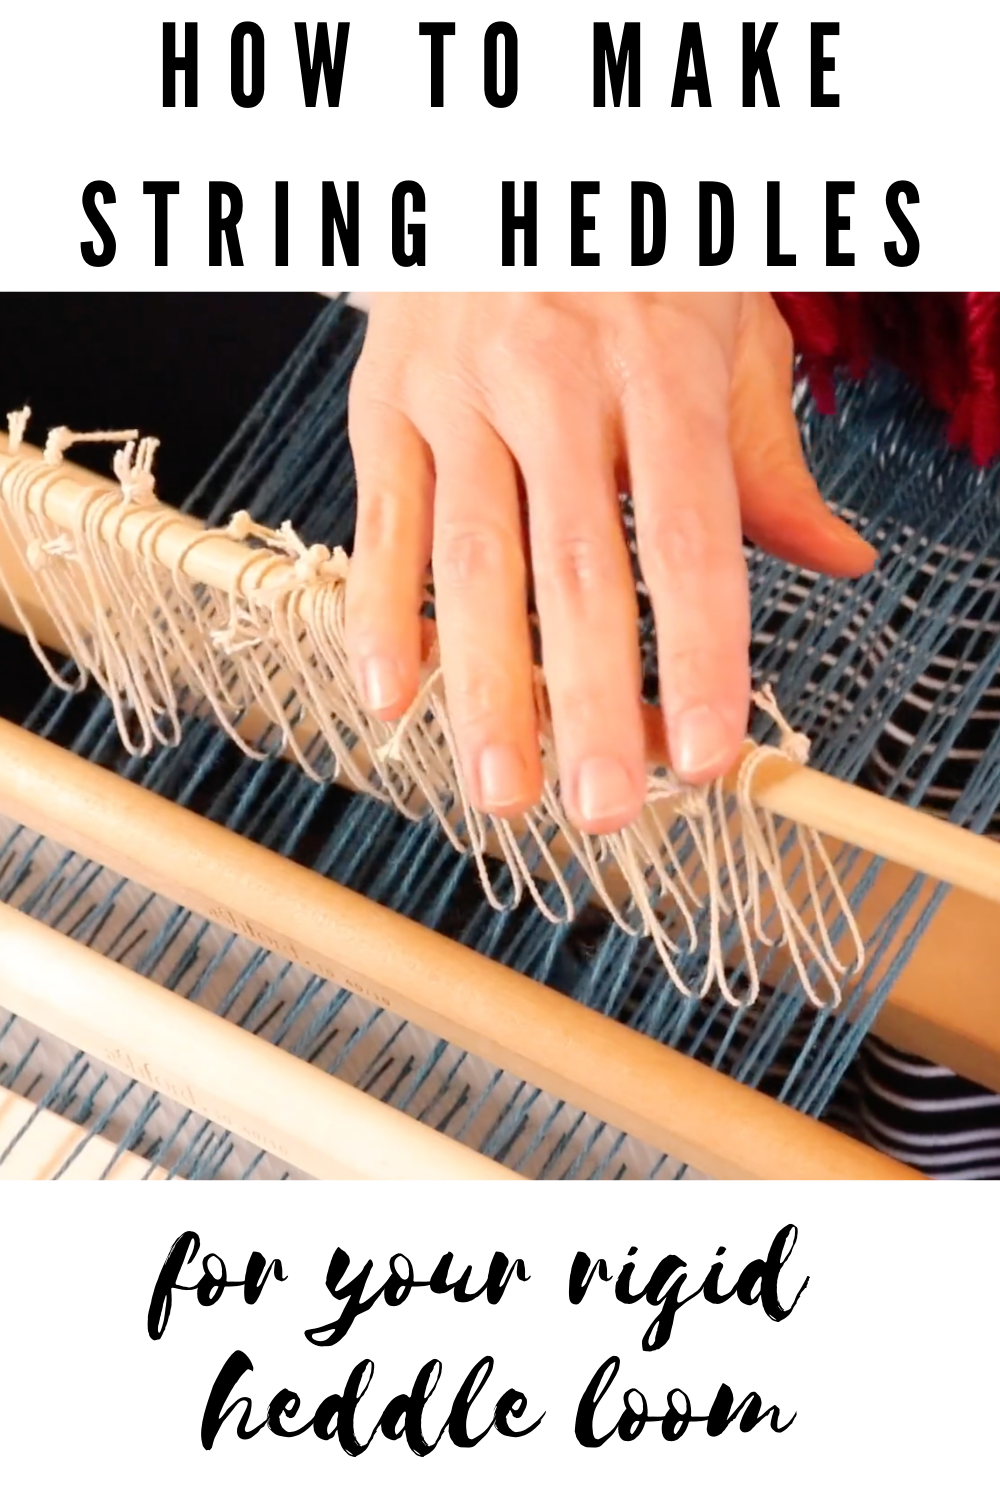 heddle meaning